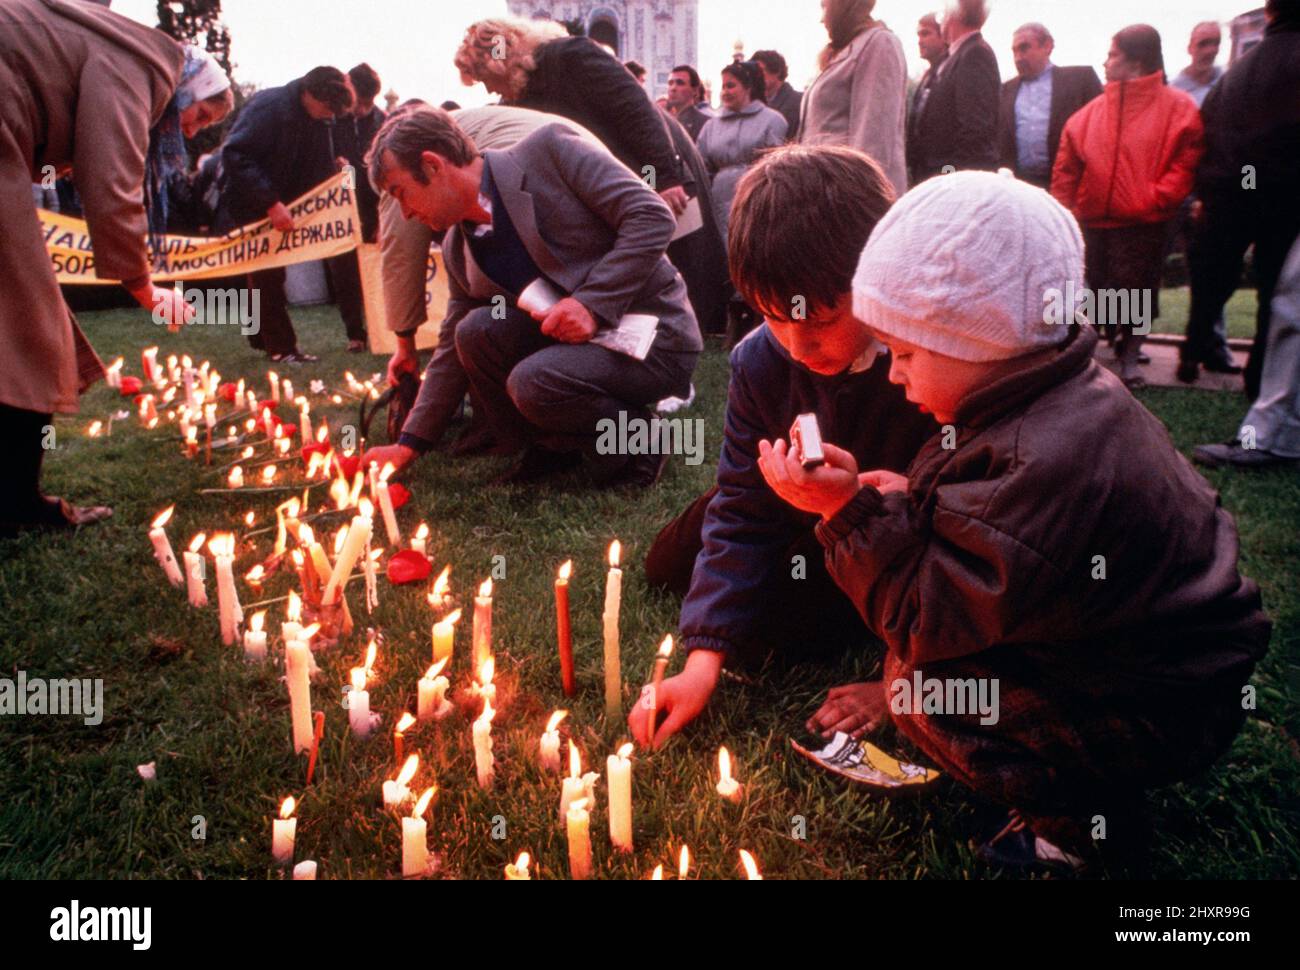 Chernobyl Anniversary, Kyiv (Kiev) April 1990. People of Kyiv lighting candles on  Bogdonitsky Square near Saint Sophia Cathedral in central Kyiv on the fourth anniversary of the 1986 nuclear accident at the Chernobyl nuclear power station 58 miles (95km) north of Kyiv. Stock Photo